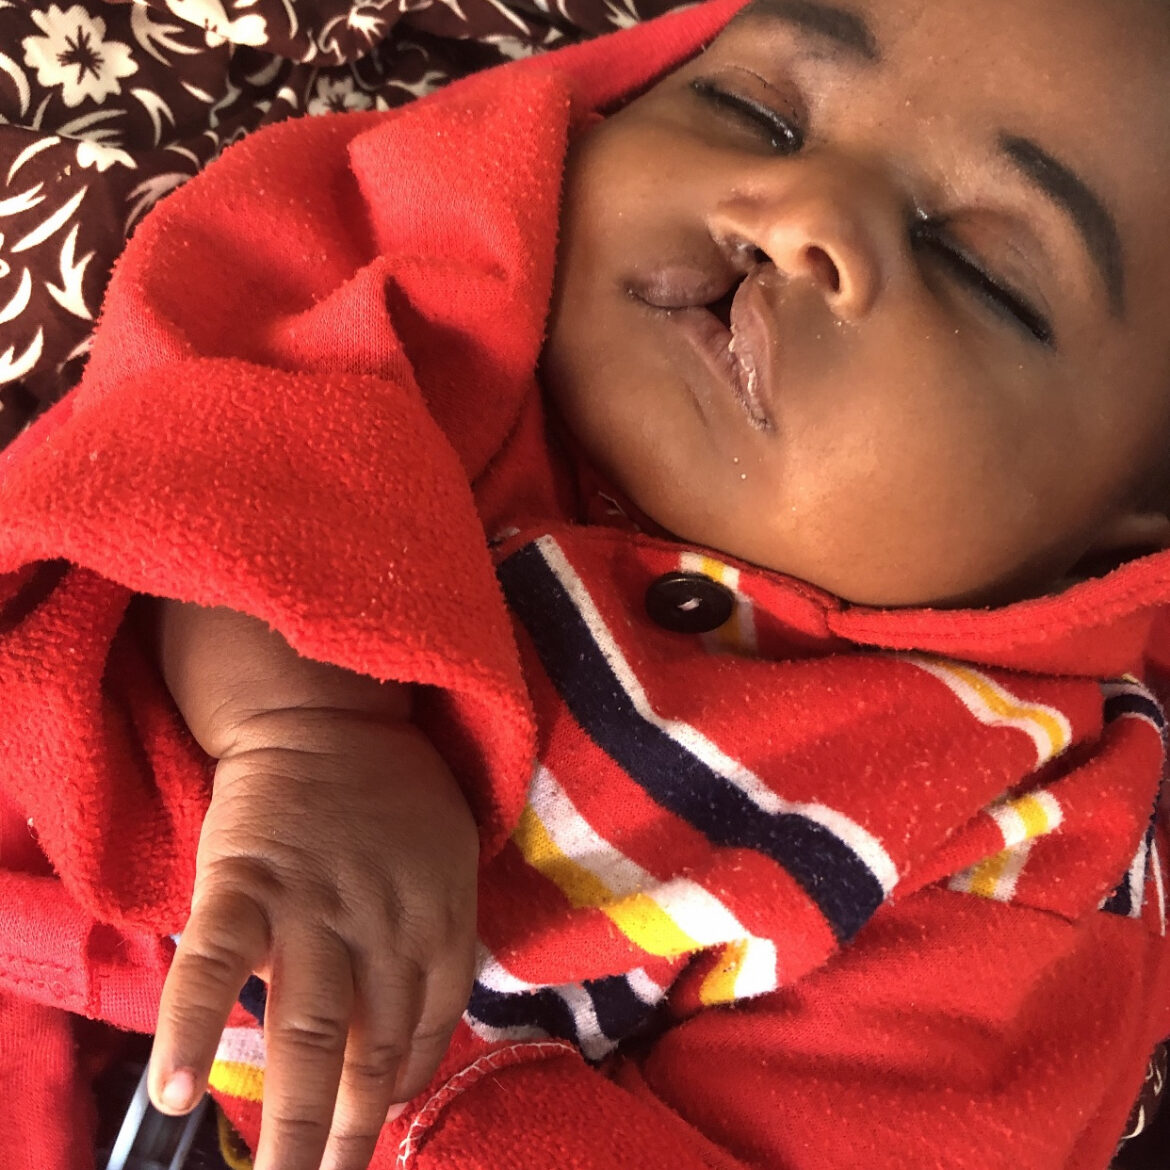 Cleft baby, Egypt Alliance for Smiles